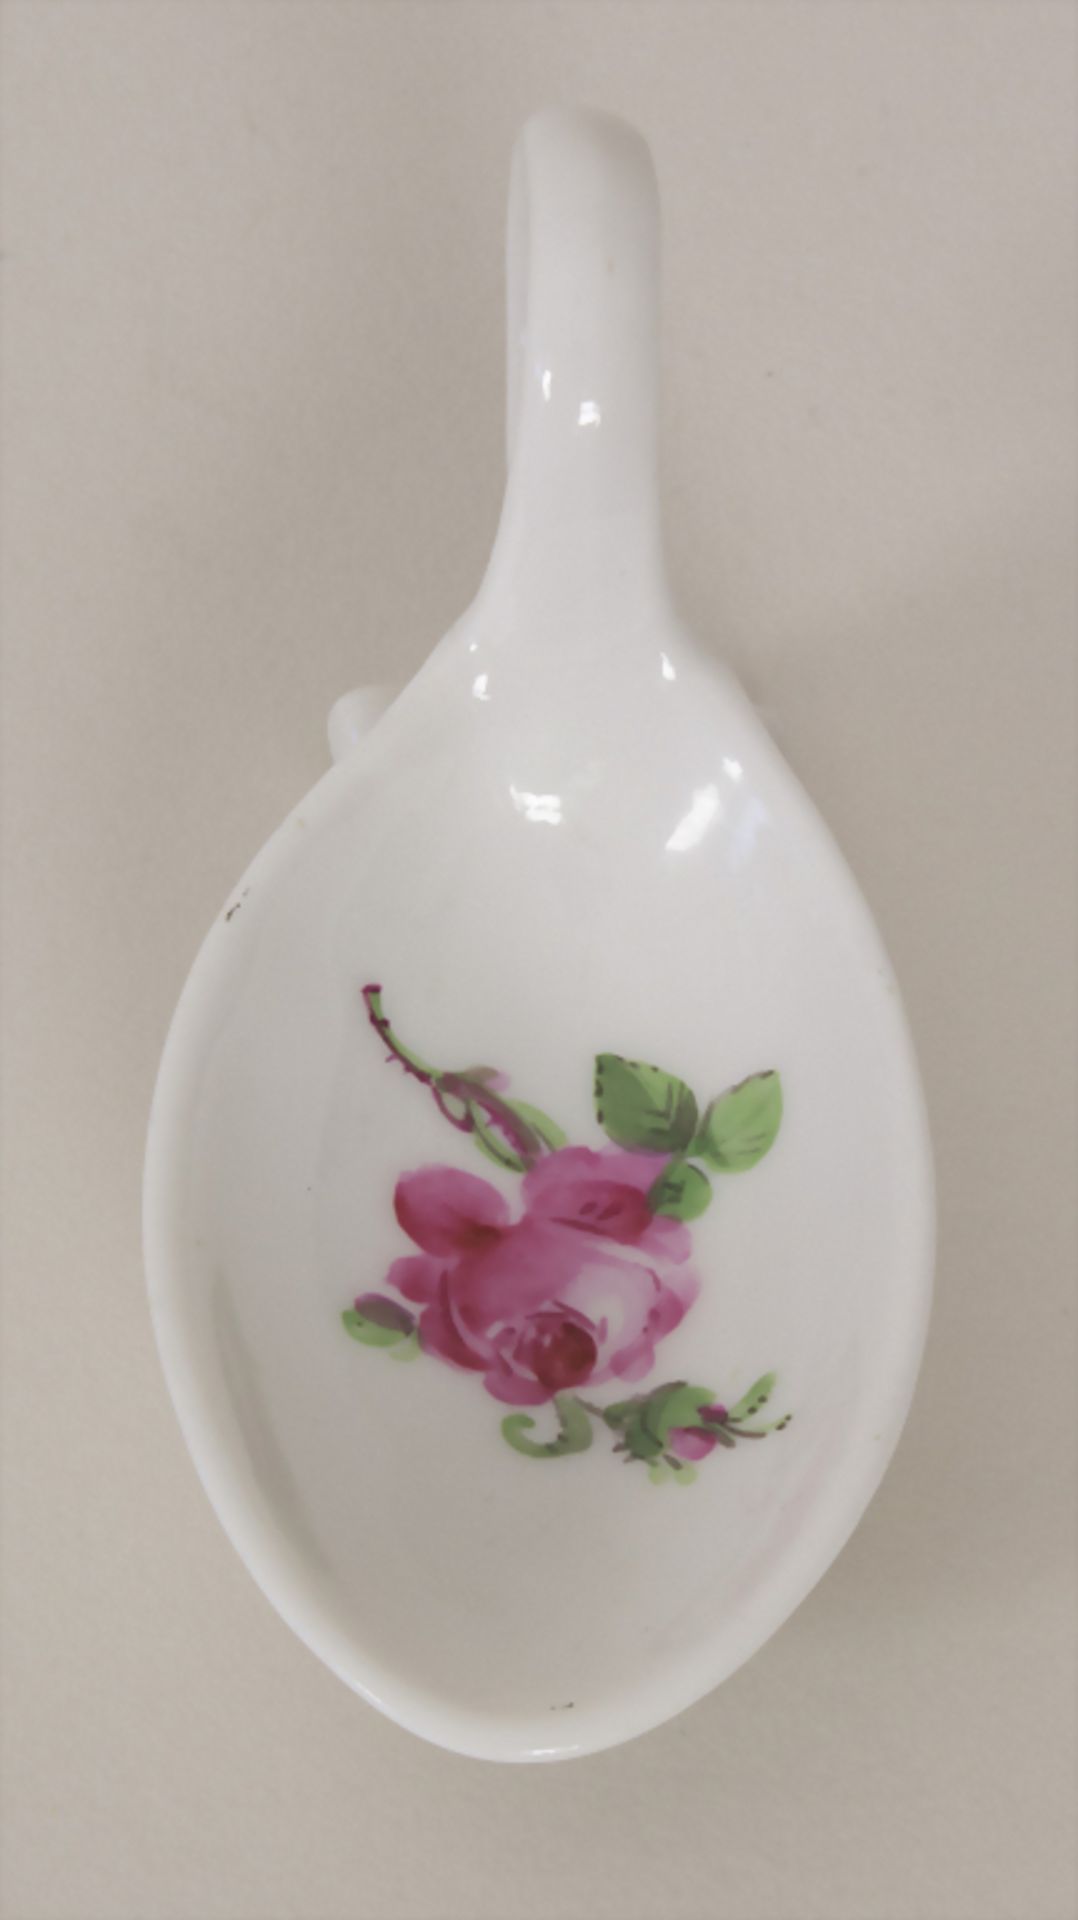 Seltener Löffel 'Rote Rose' / A rare spoon with rose pattern, Meissen, Mitte 19. Jh.M - Image 2 of 5